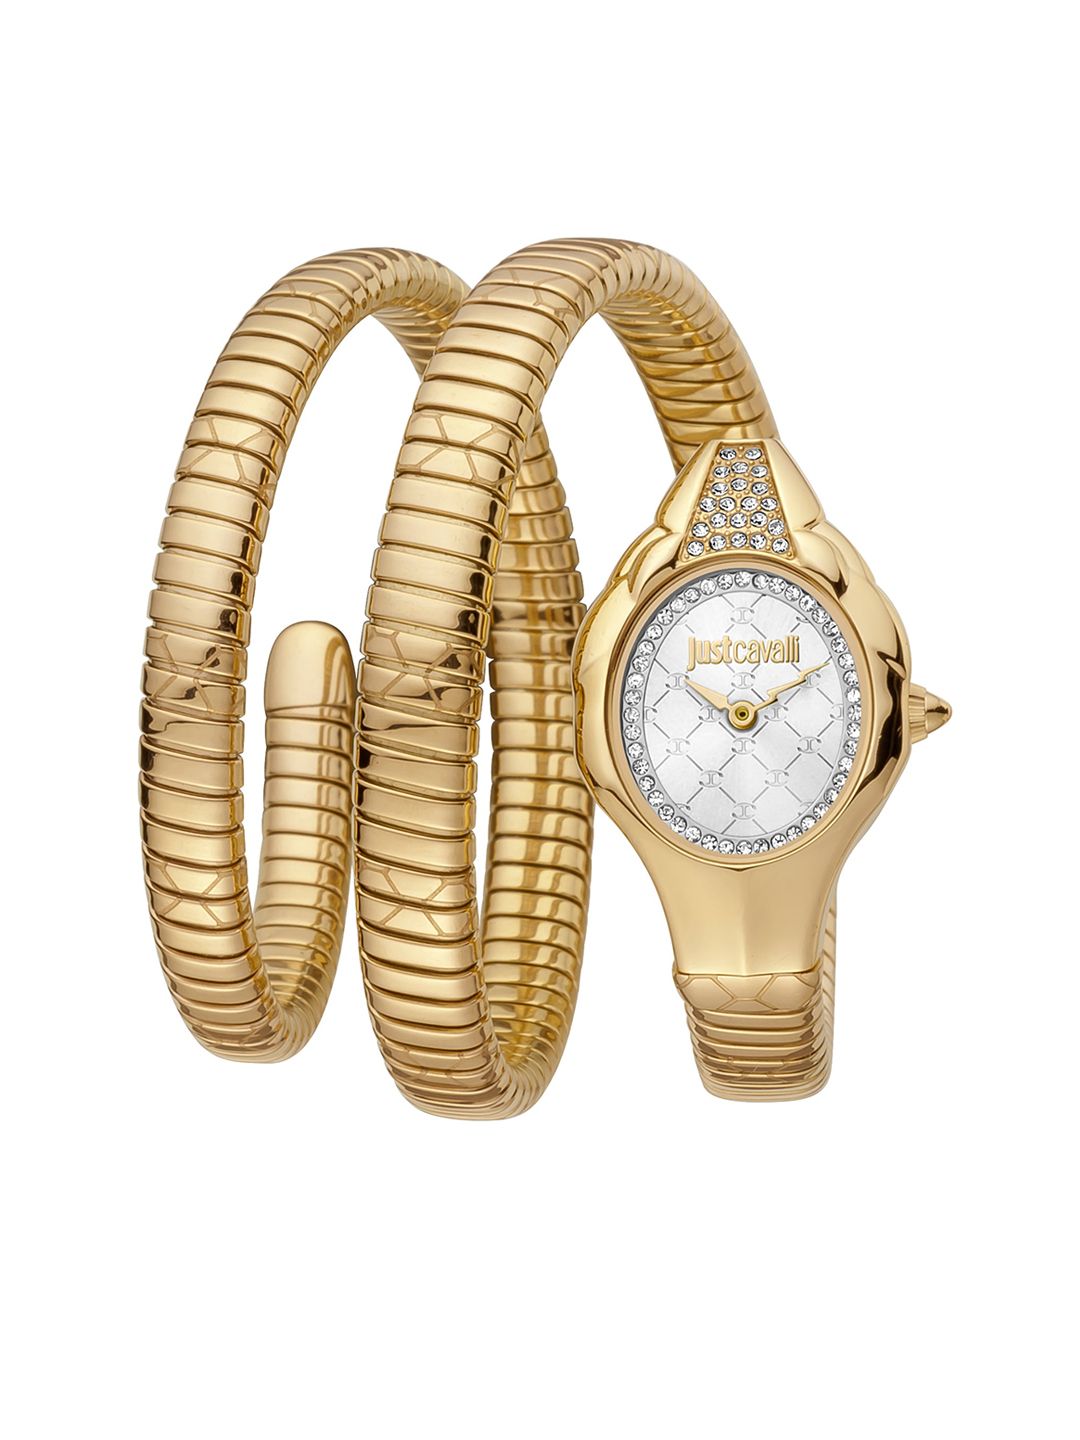 Just Cavalli Women White Embellished Dial Wrap Around Straps Analogue Watch - JC1L189M0035 Price in India